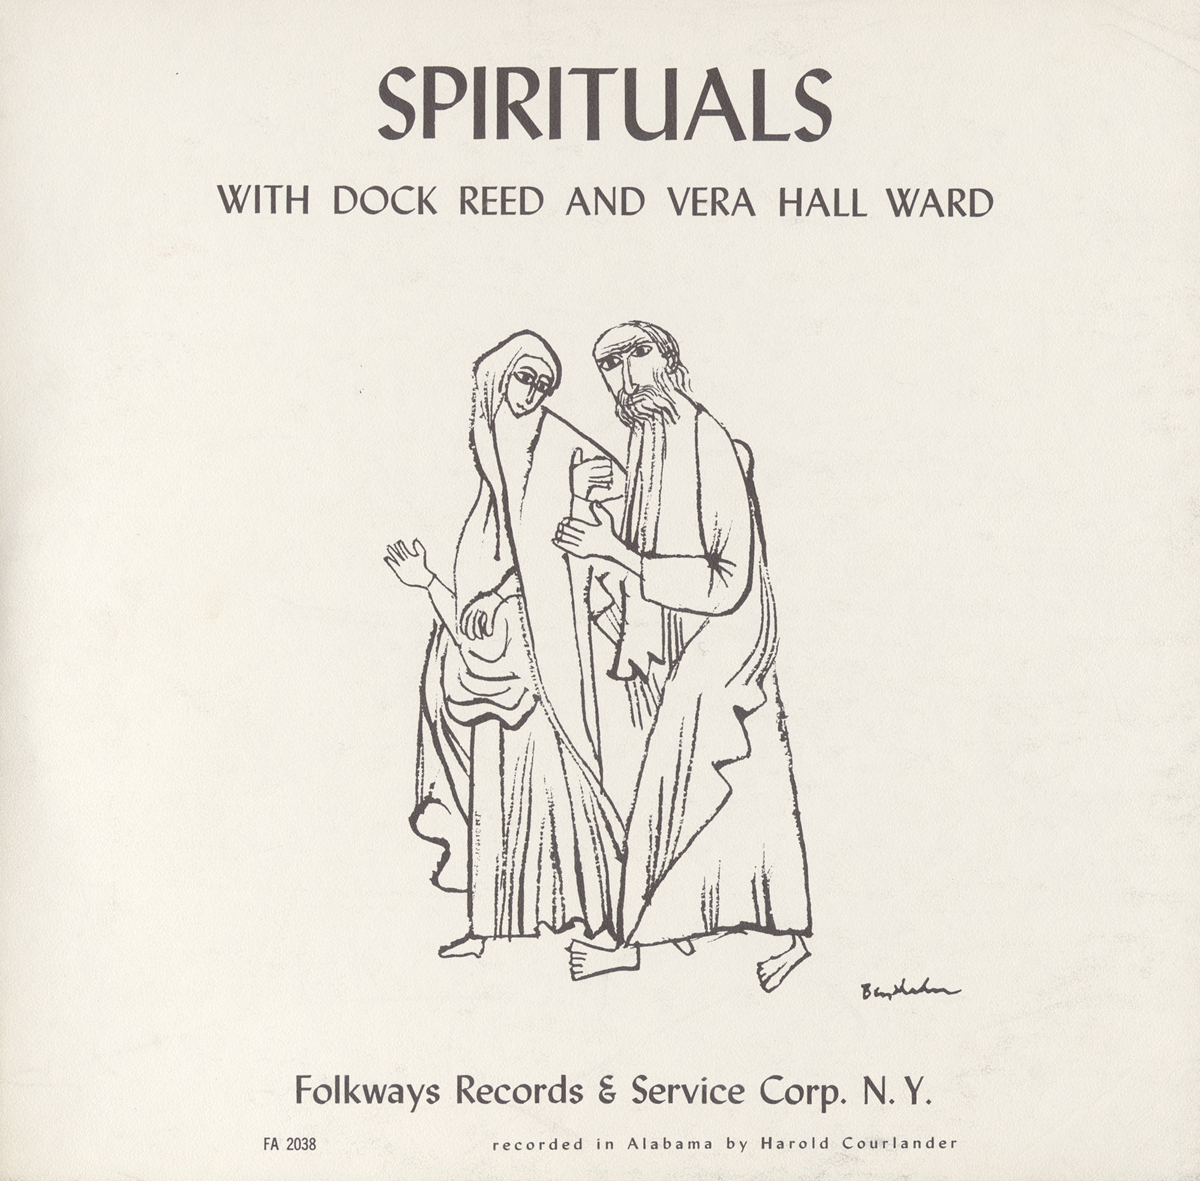 SPIRITUALS WITH DOCK REED AND VERA HALL WARD